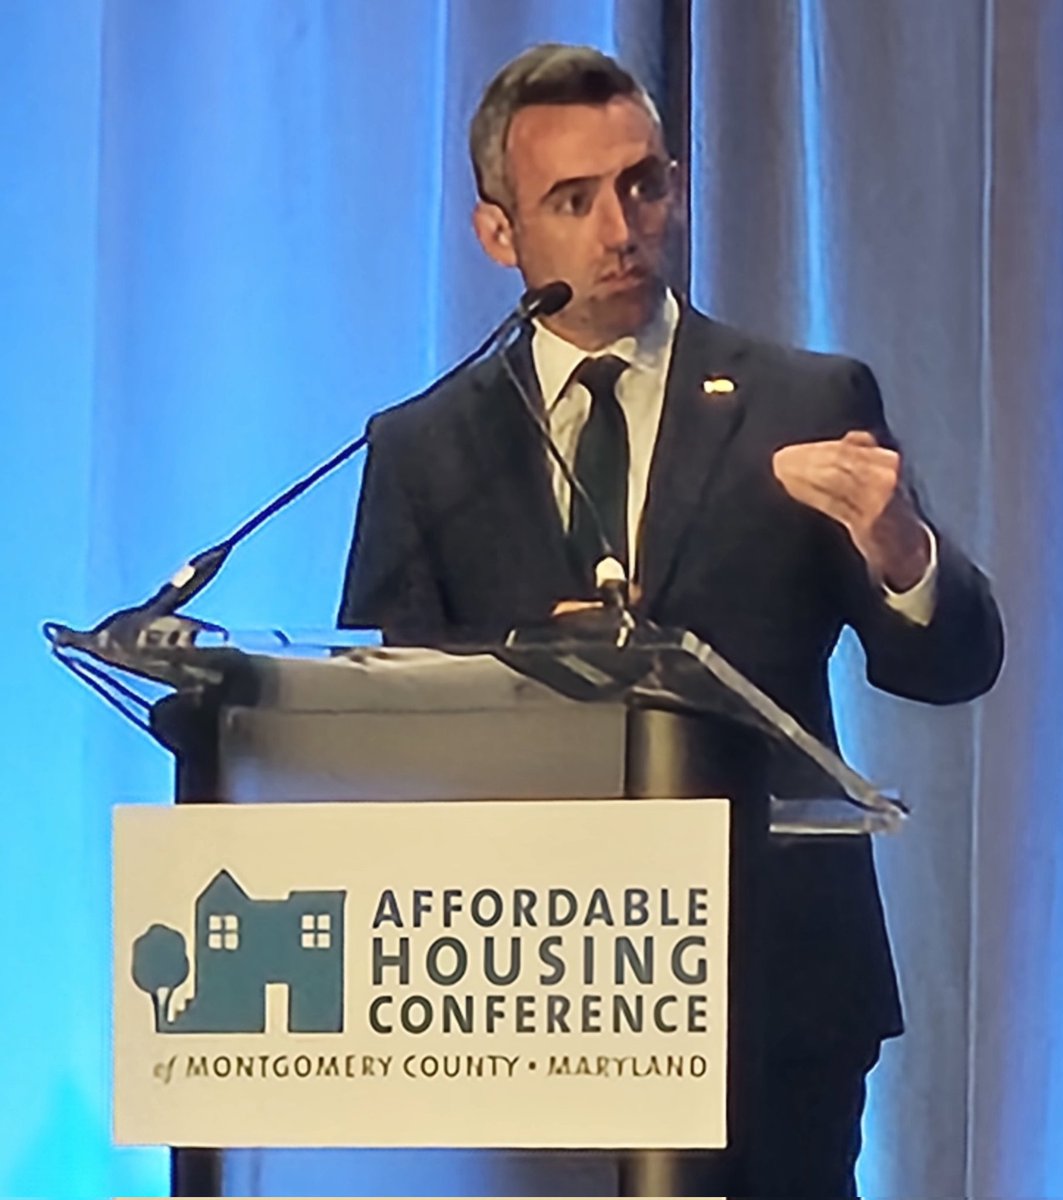 'This (#MDGA24) session was undoubtedly a tirning point to increasing housing disability.' - #Maryland #Housing Secretary @jacobrday at the @HousingMoCo Conference.